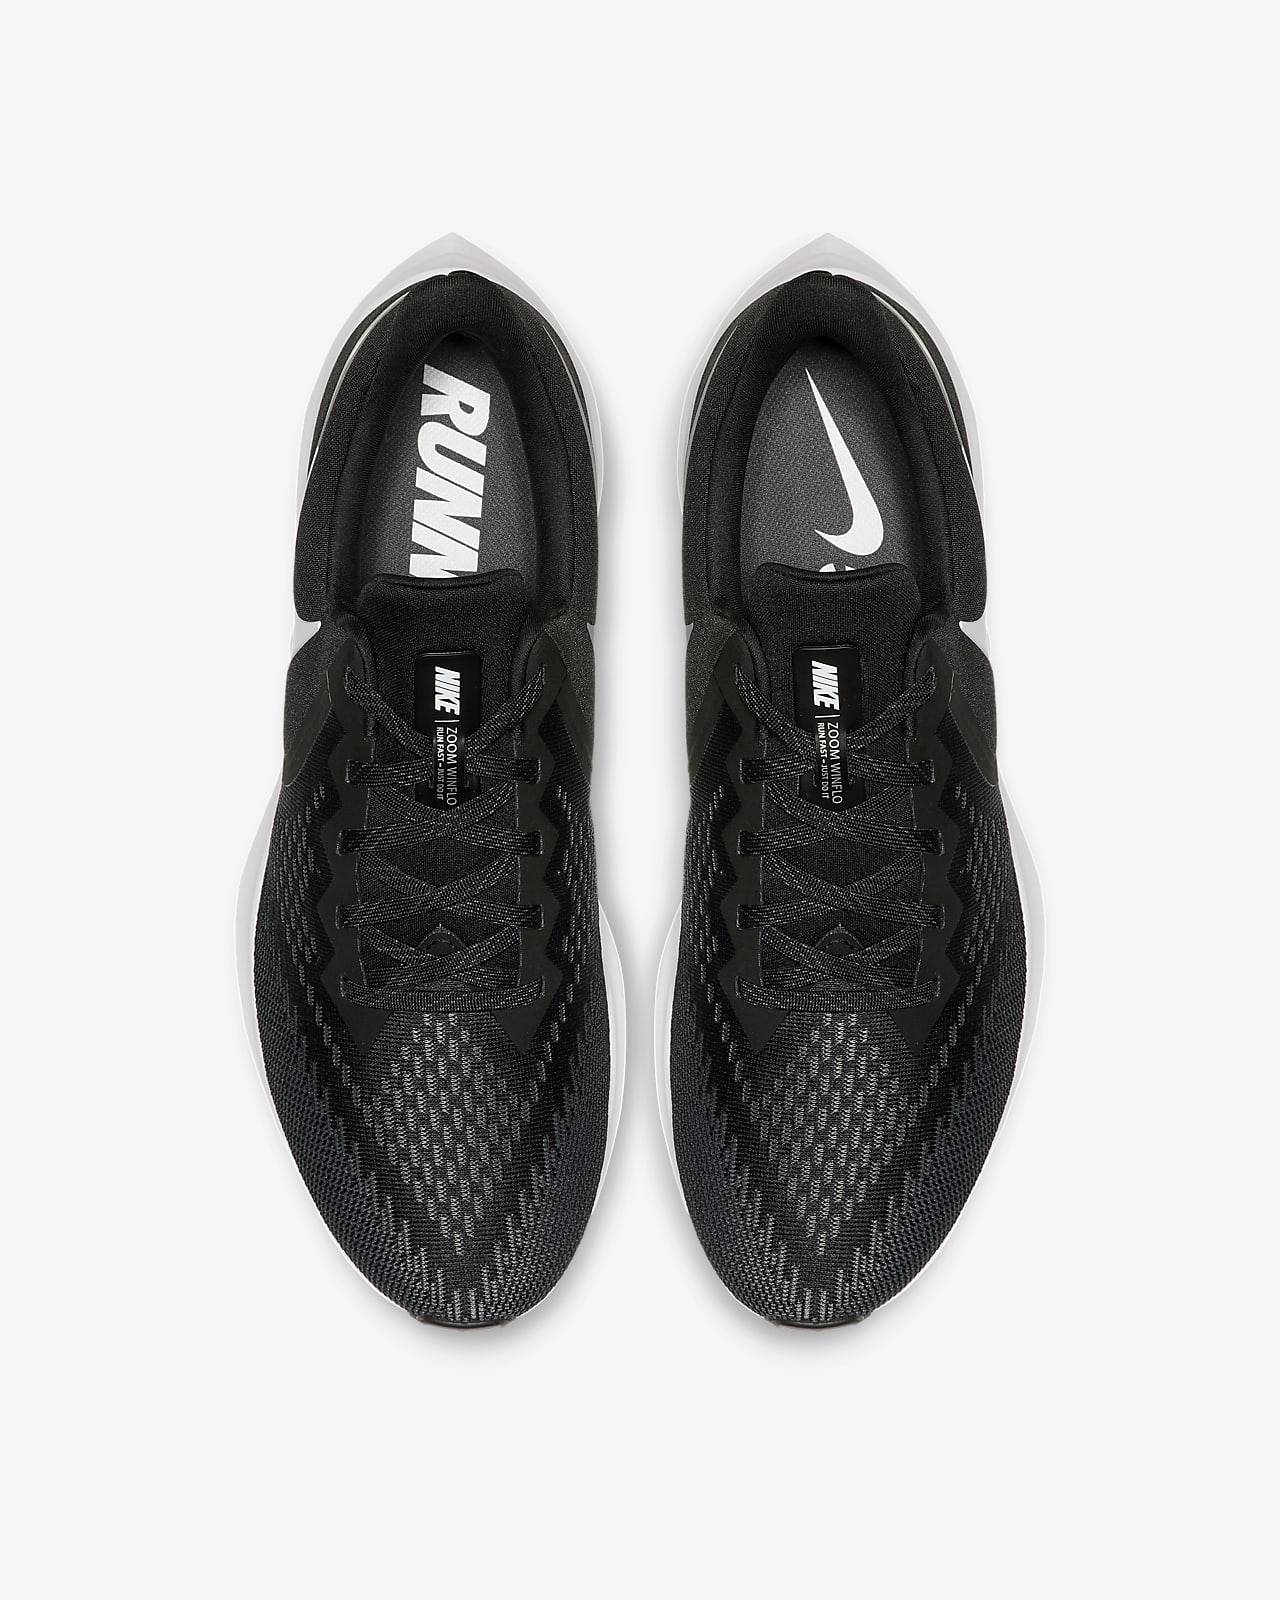 men's nike air zoom winflo 6 running shoes